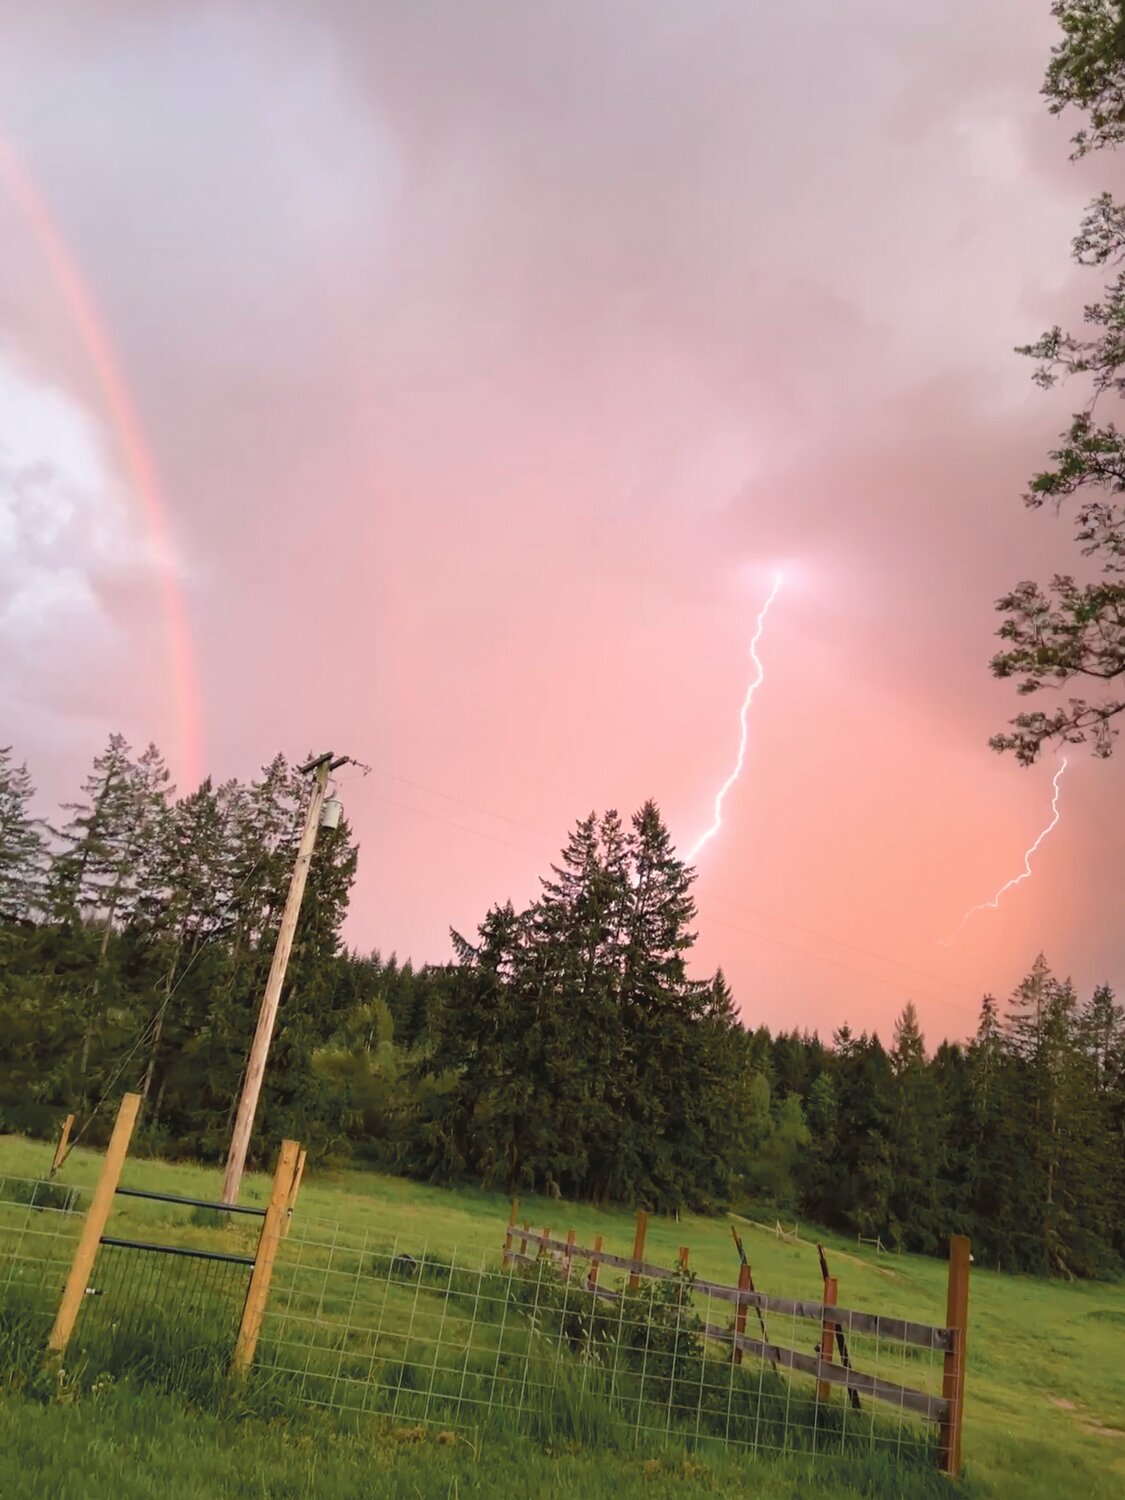 This photo of the thunderstorm on Monday, May 15, was captured by Jenny Sponton in Yelm.